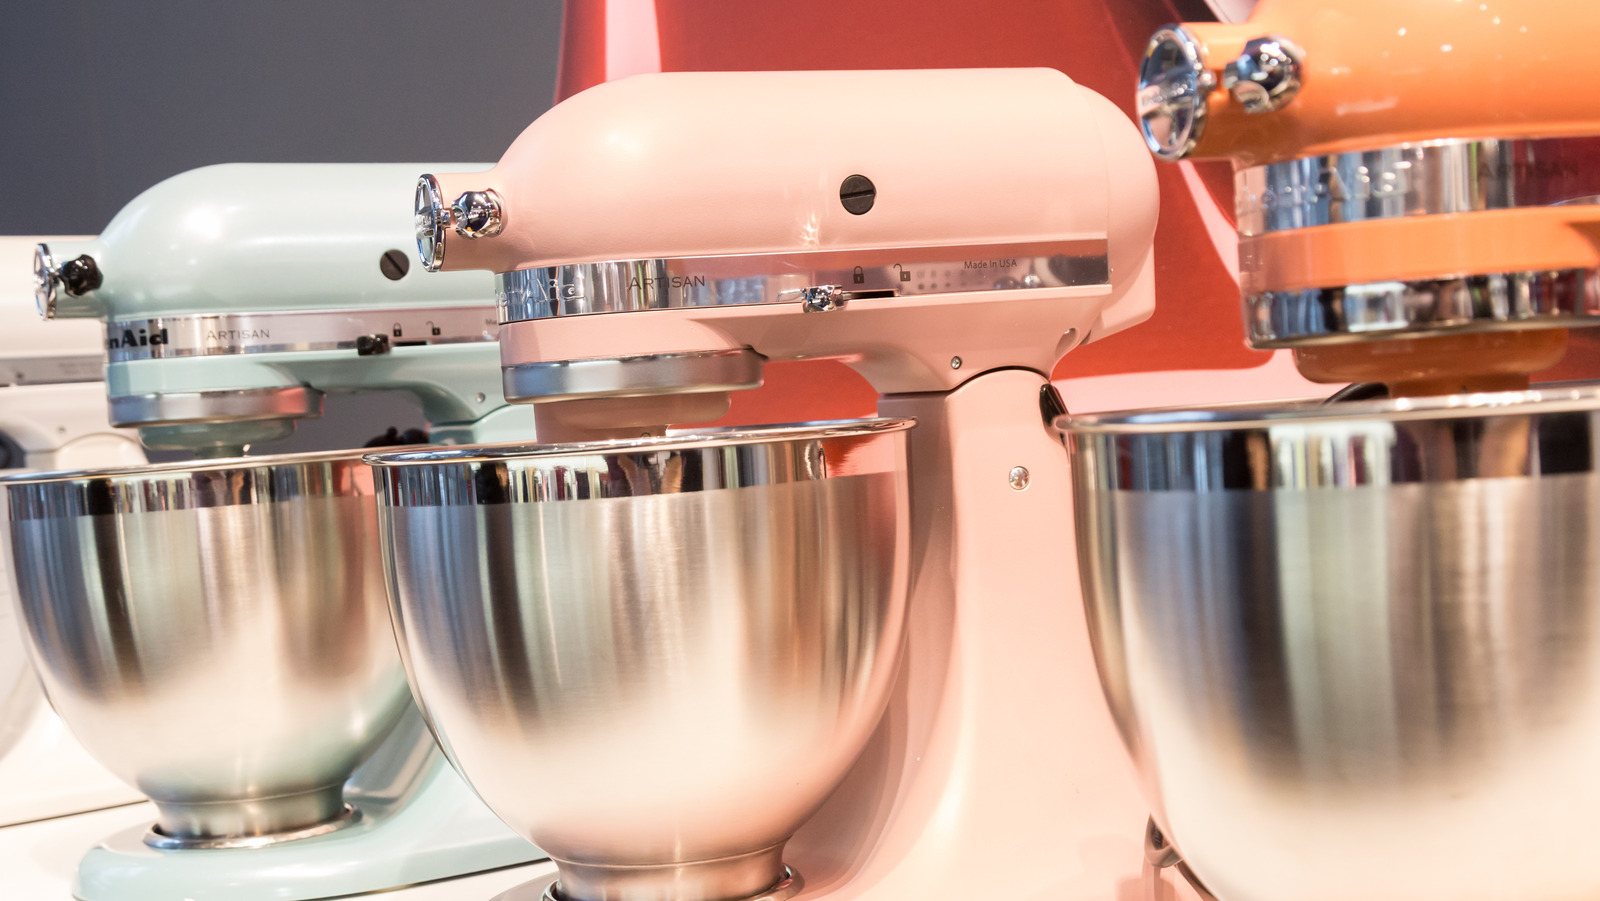 https://www.thelist.com/img/gallery/alternatives-to-try-if-you-cant-afford-a-kitchenaid-mixer/l-intro-1620940318.jpg